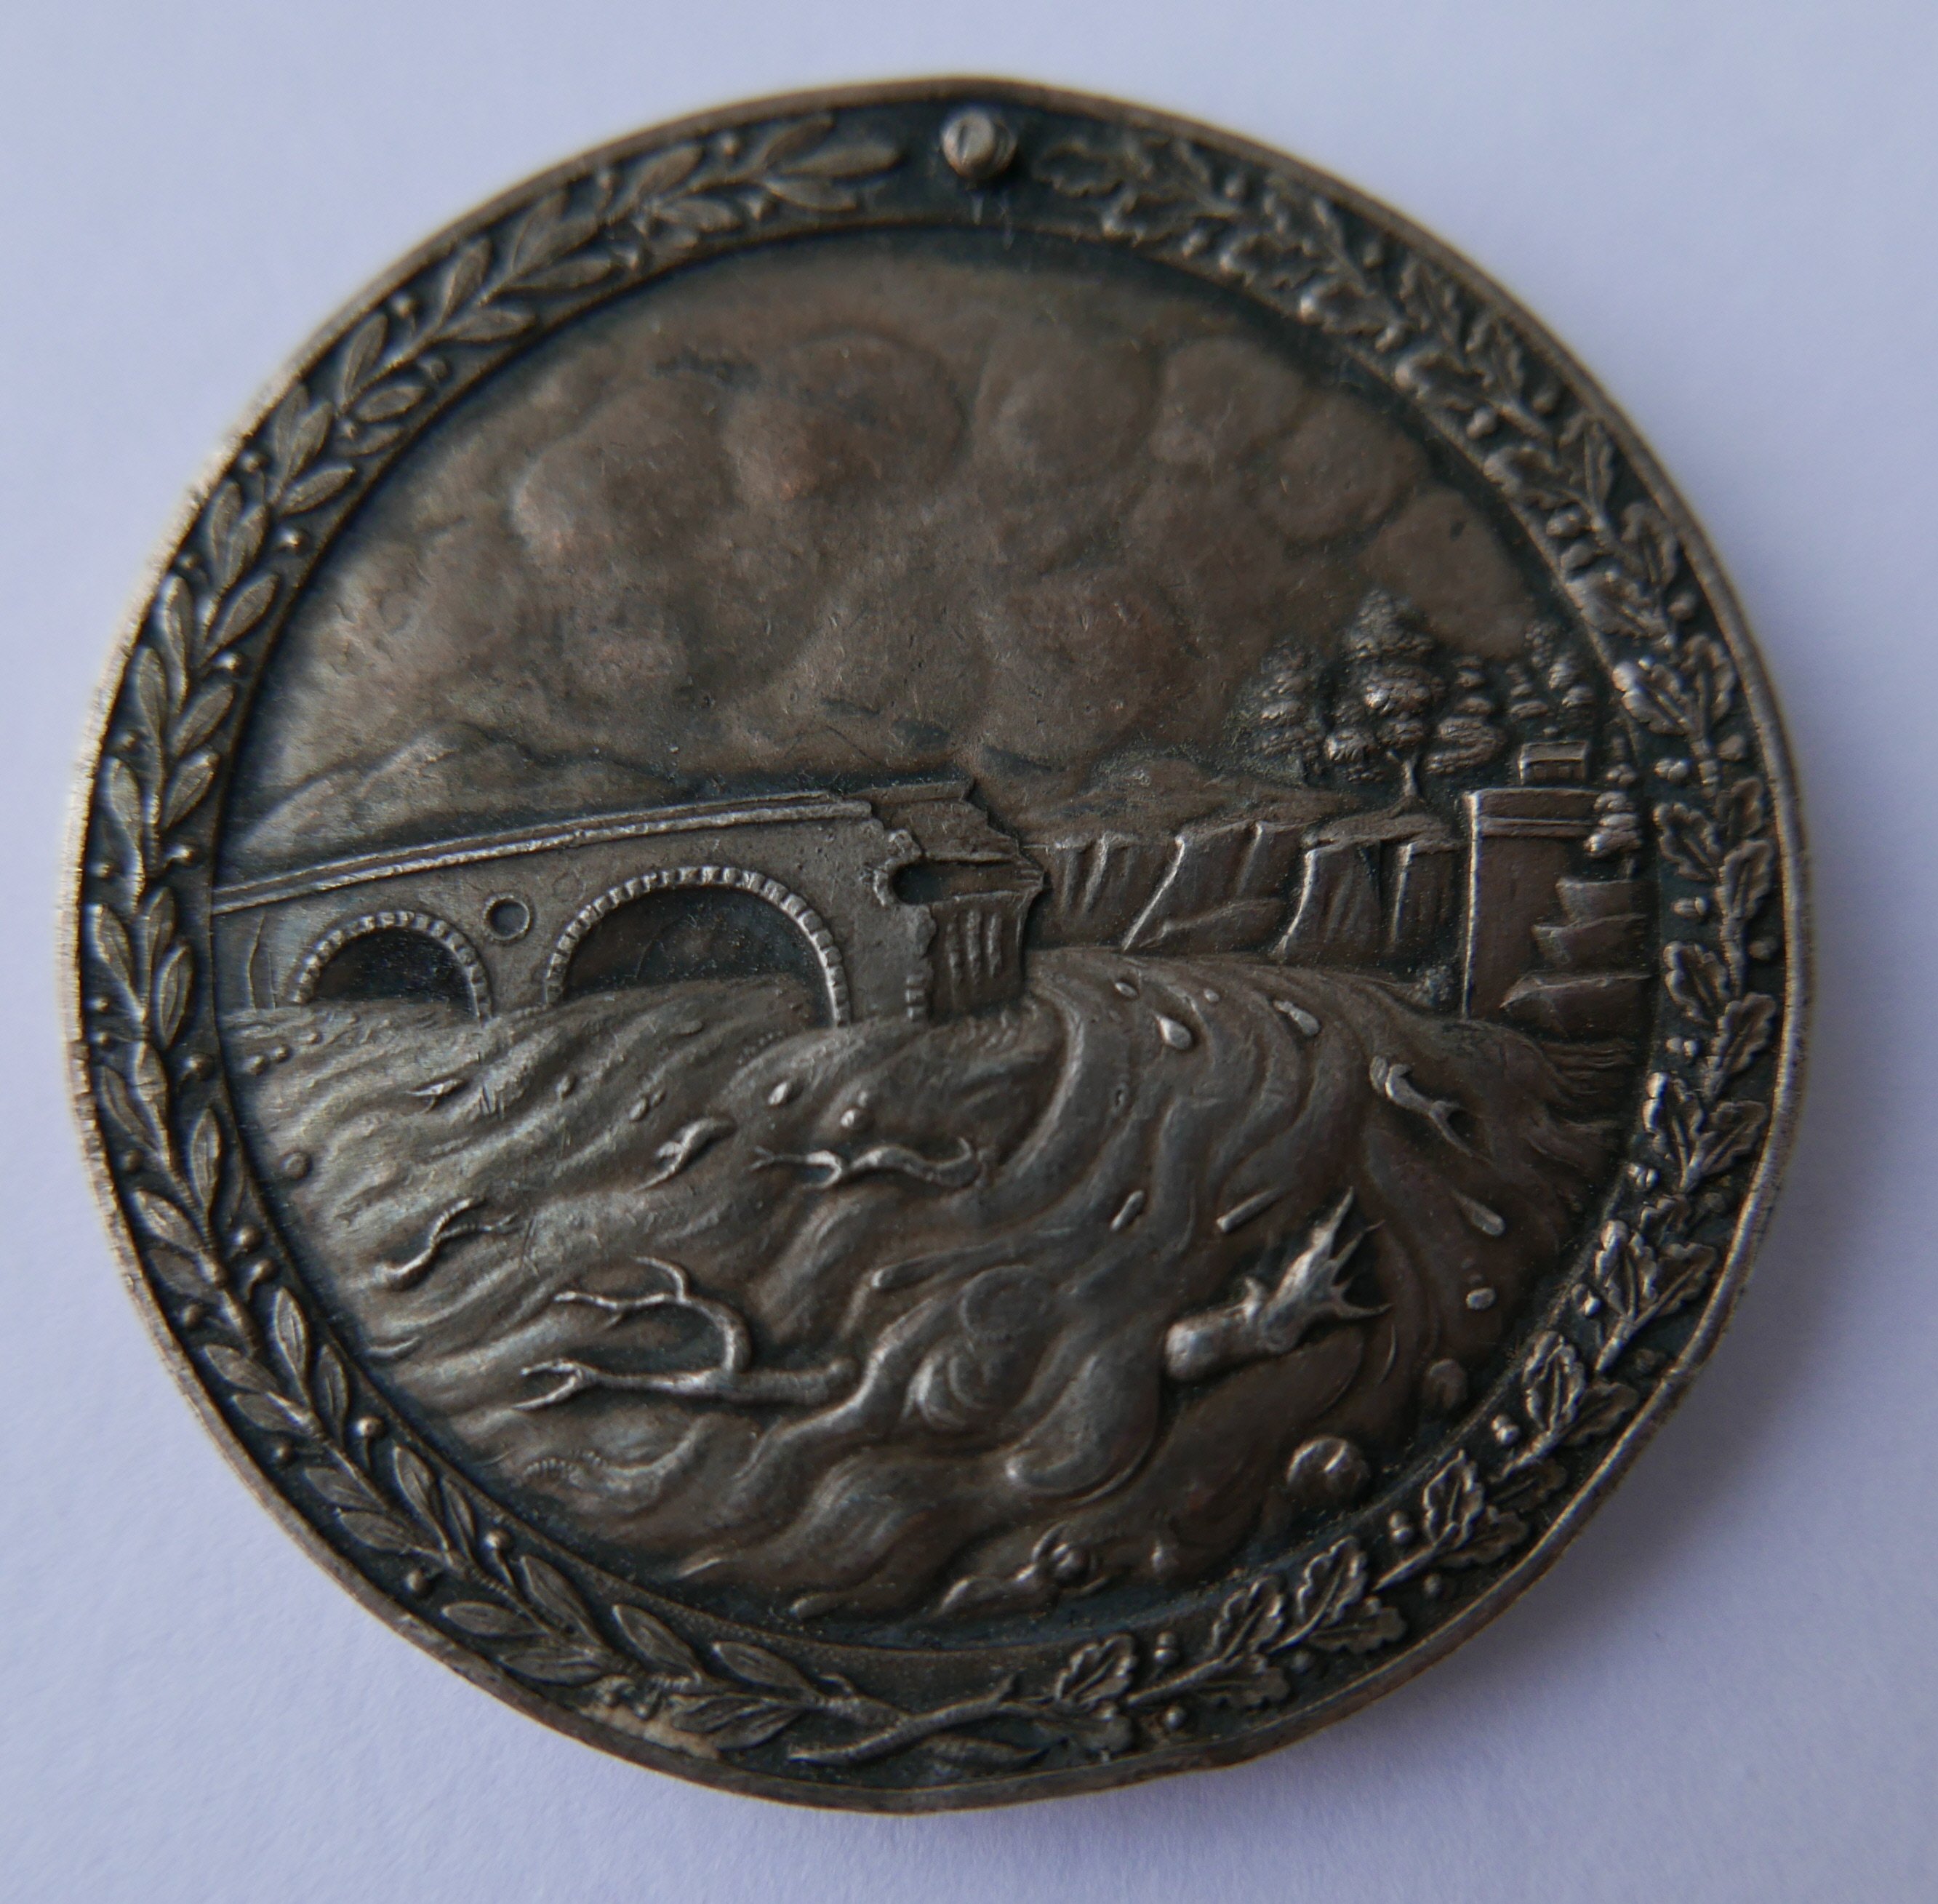 Great Flood of Moray 1829 Medal awarded by the Flood Fund to a James Young-Dallachy.